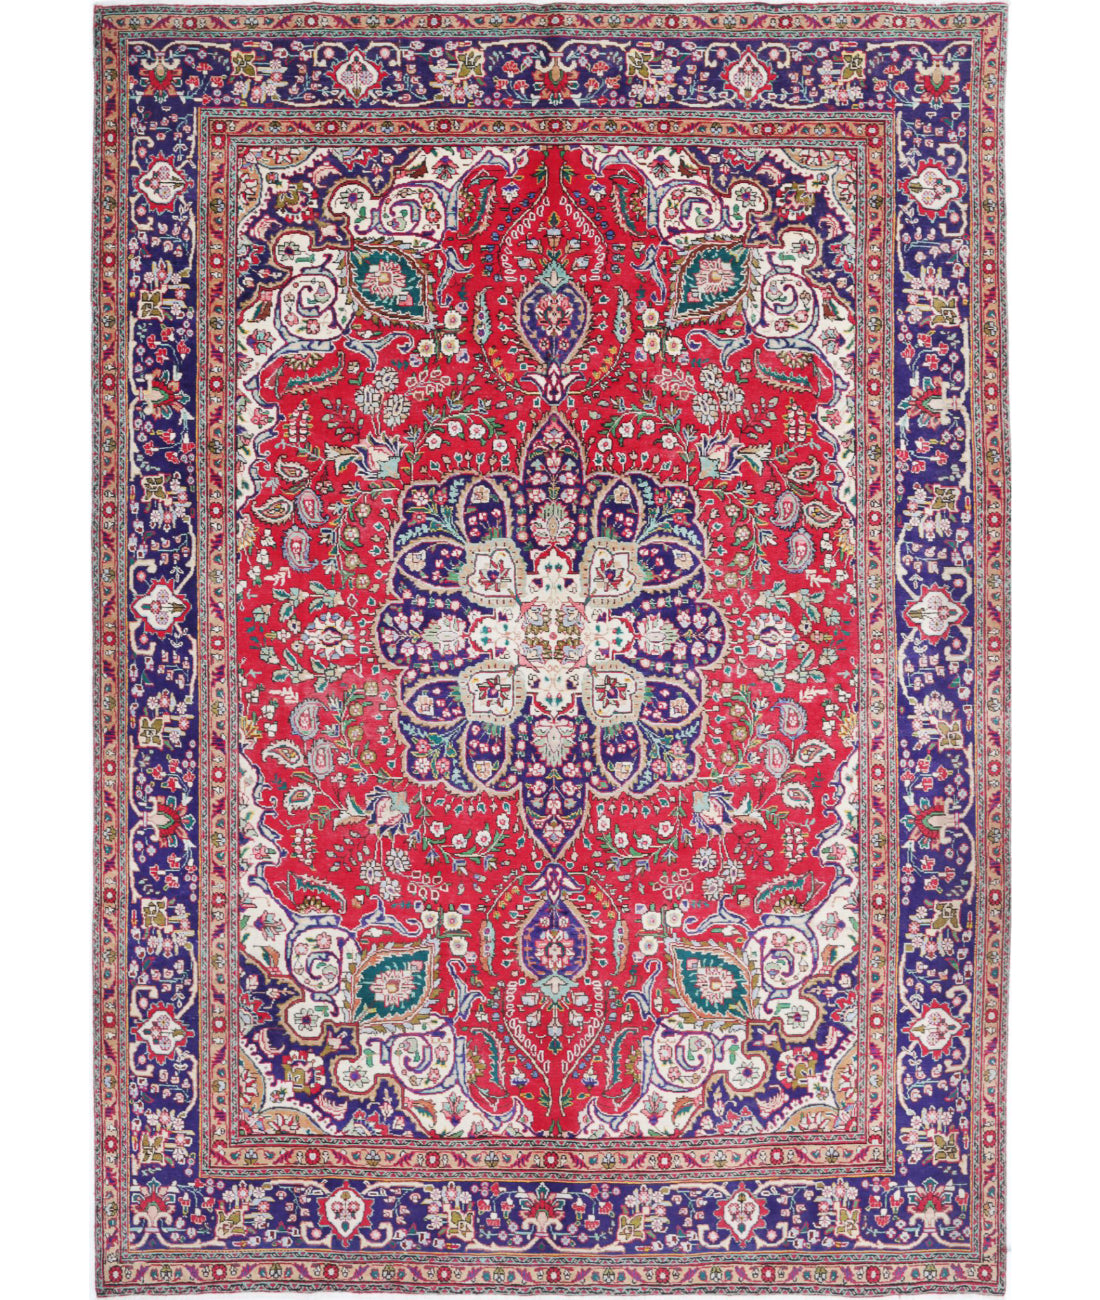 Hand Knotted Persian Tabriz Wool Rug - 8'4'' x 11'8'' 8'4'' x 11'8'' (250 X 350) / Red / Blue